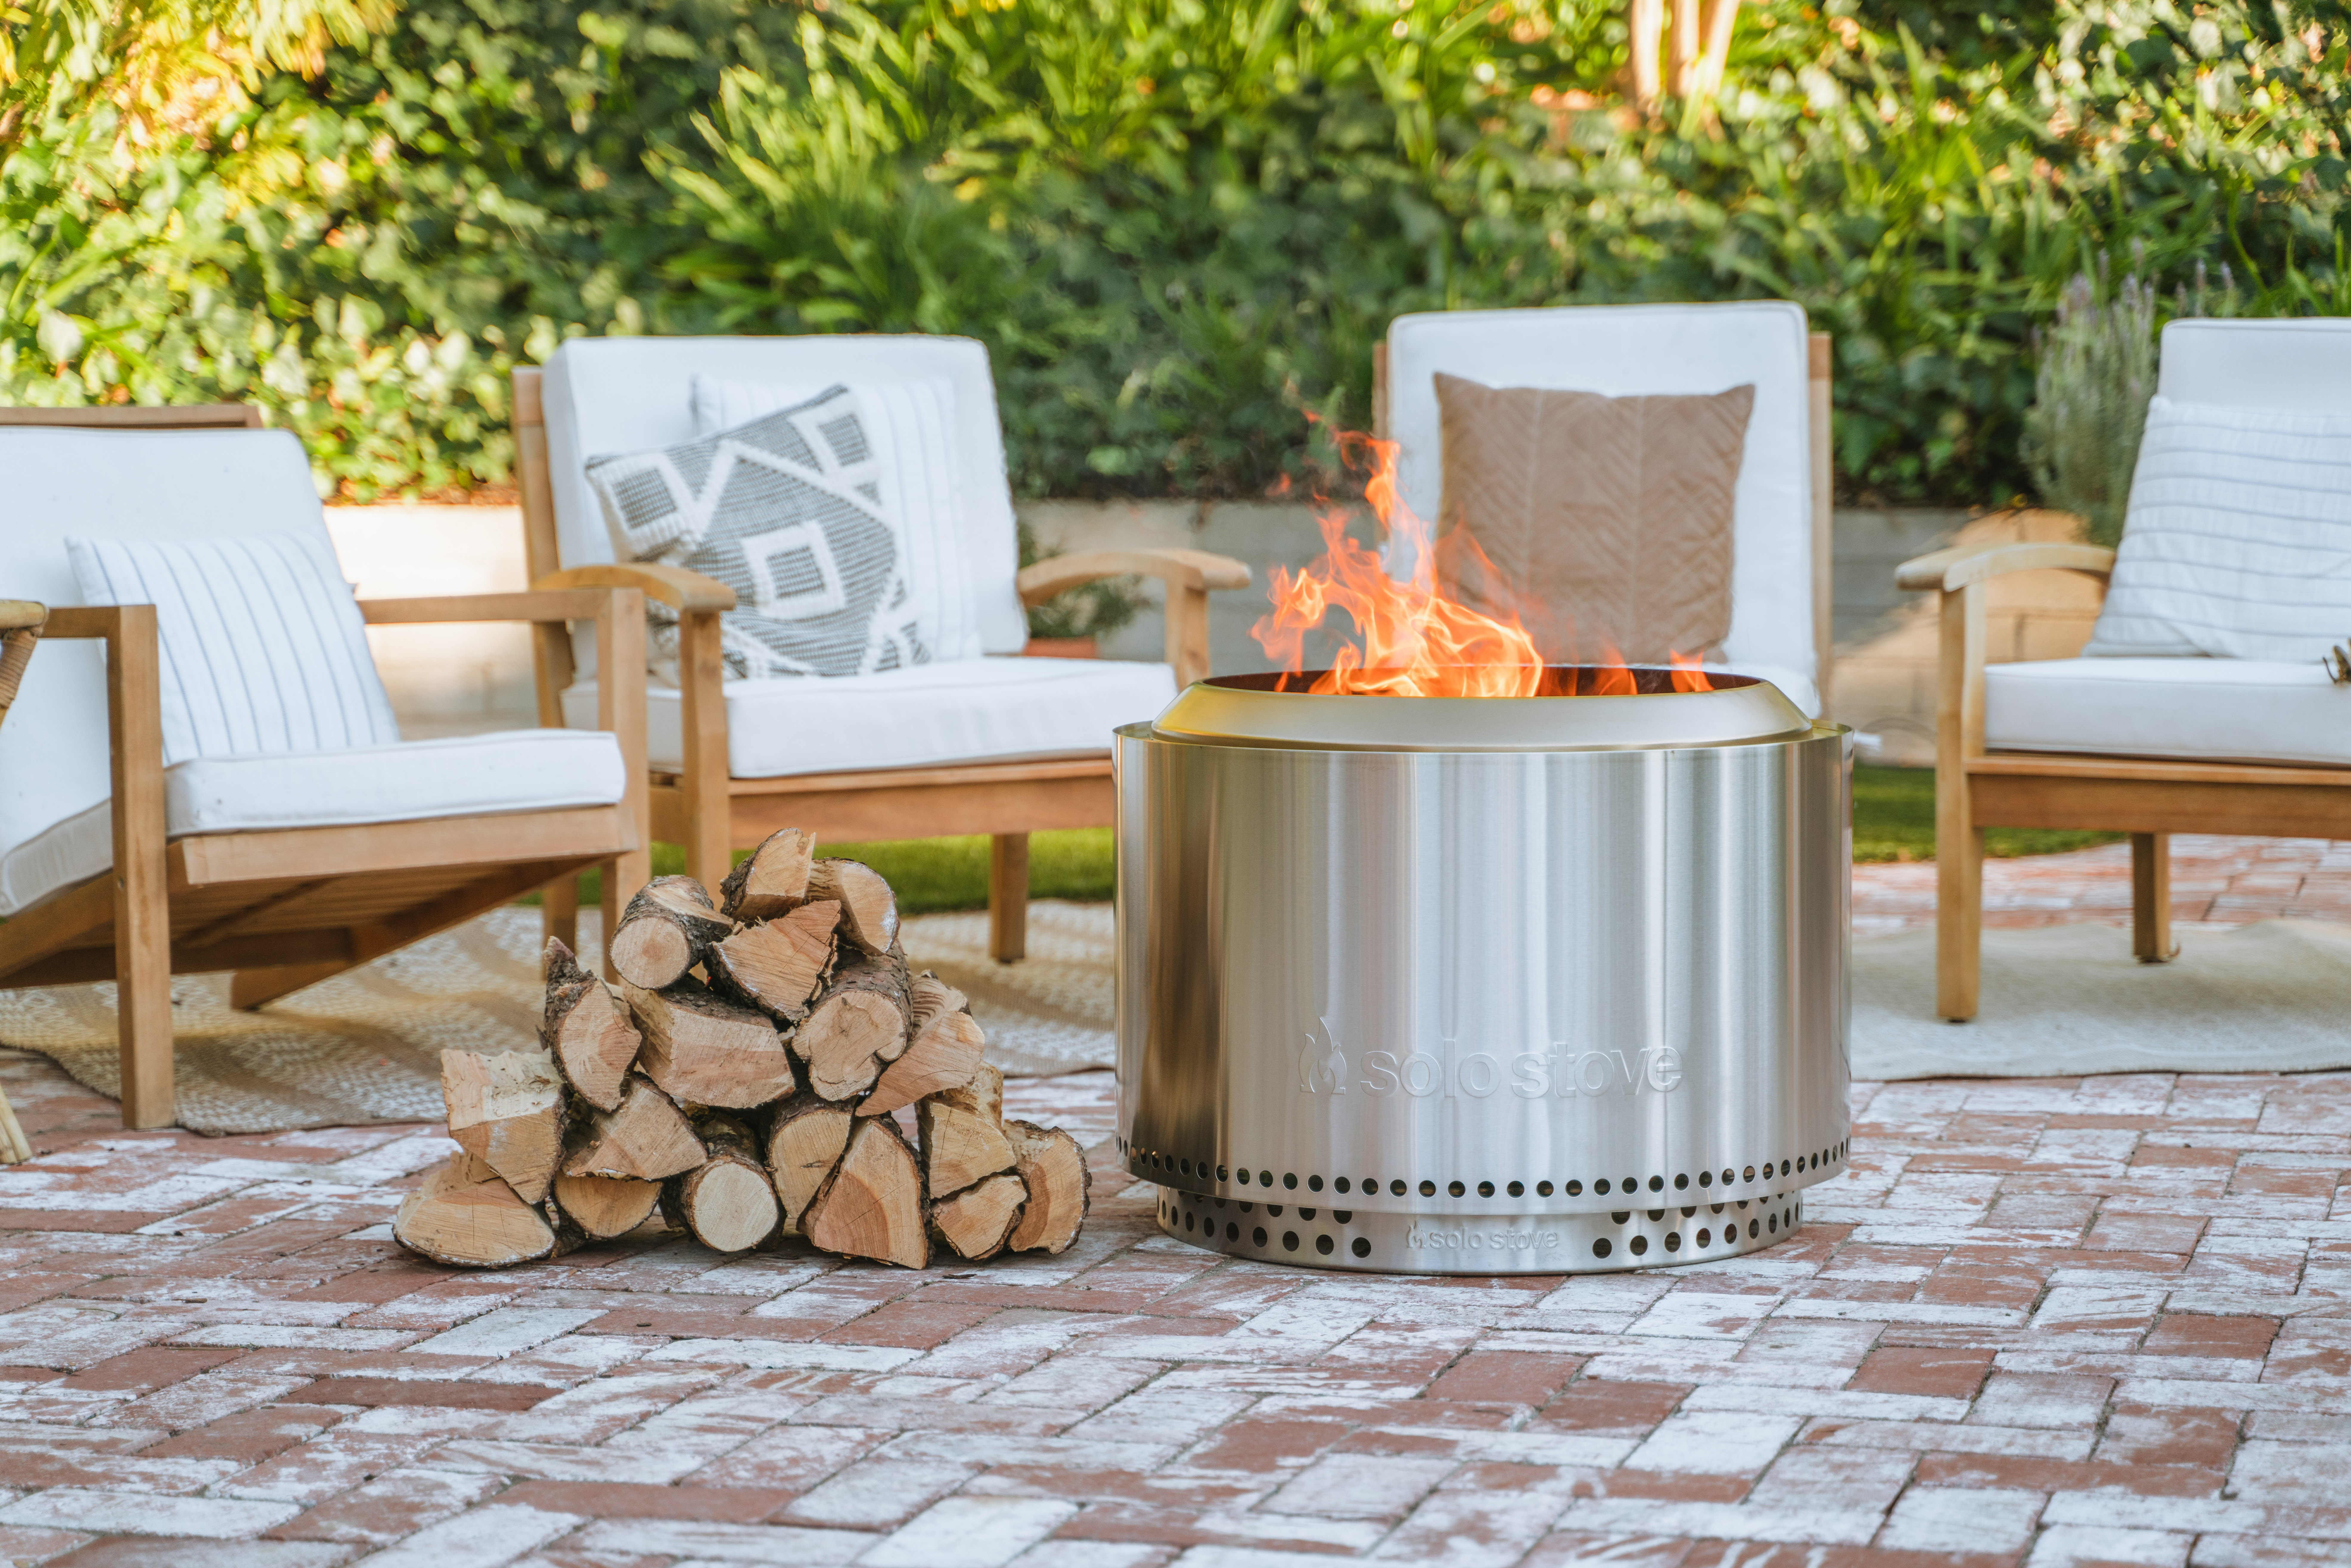 Solo Stove Yukon 1.0 Stainless Steel Fire Pit with Stand